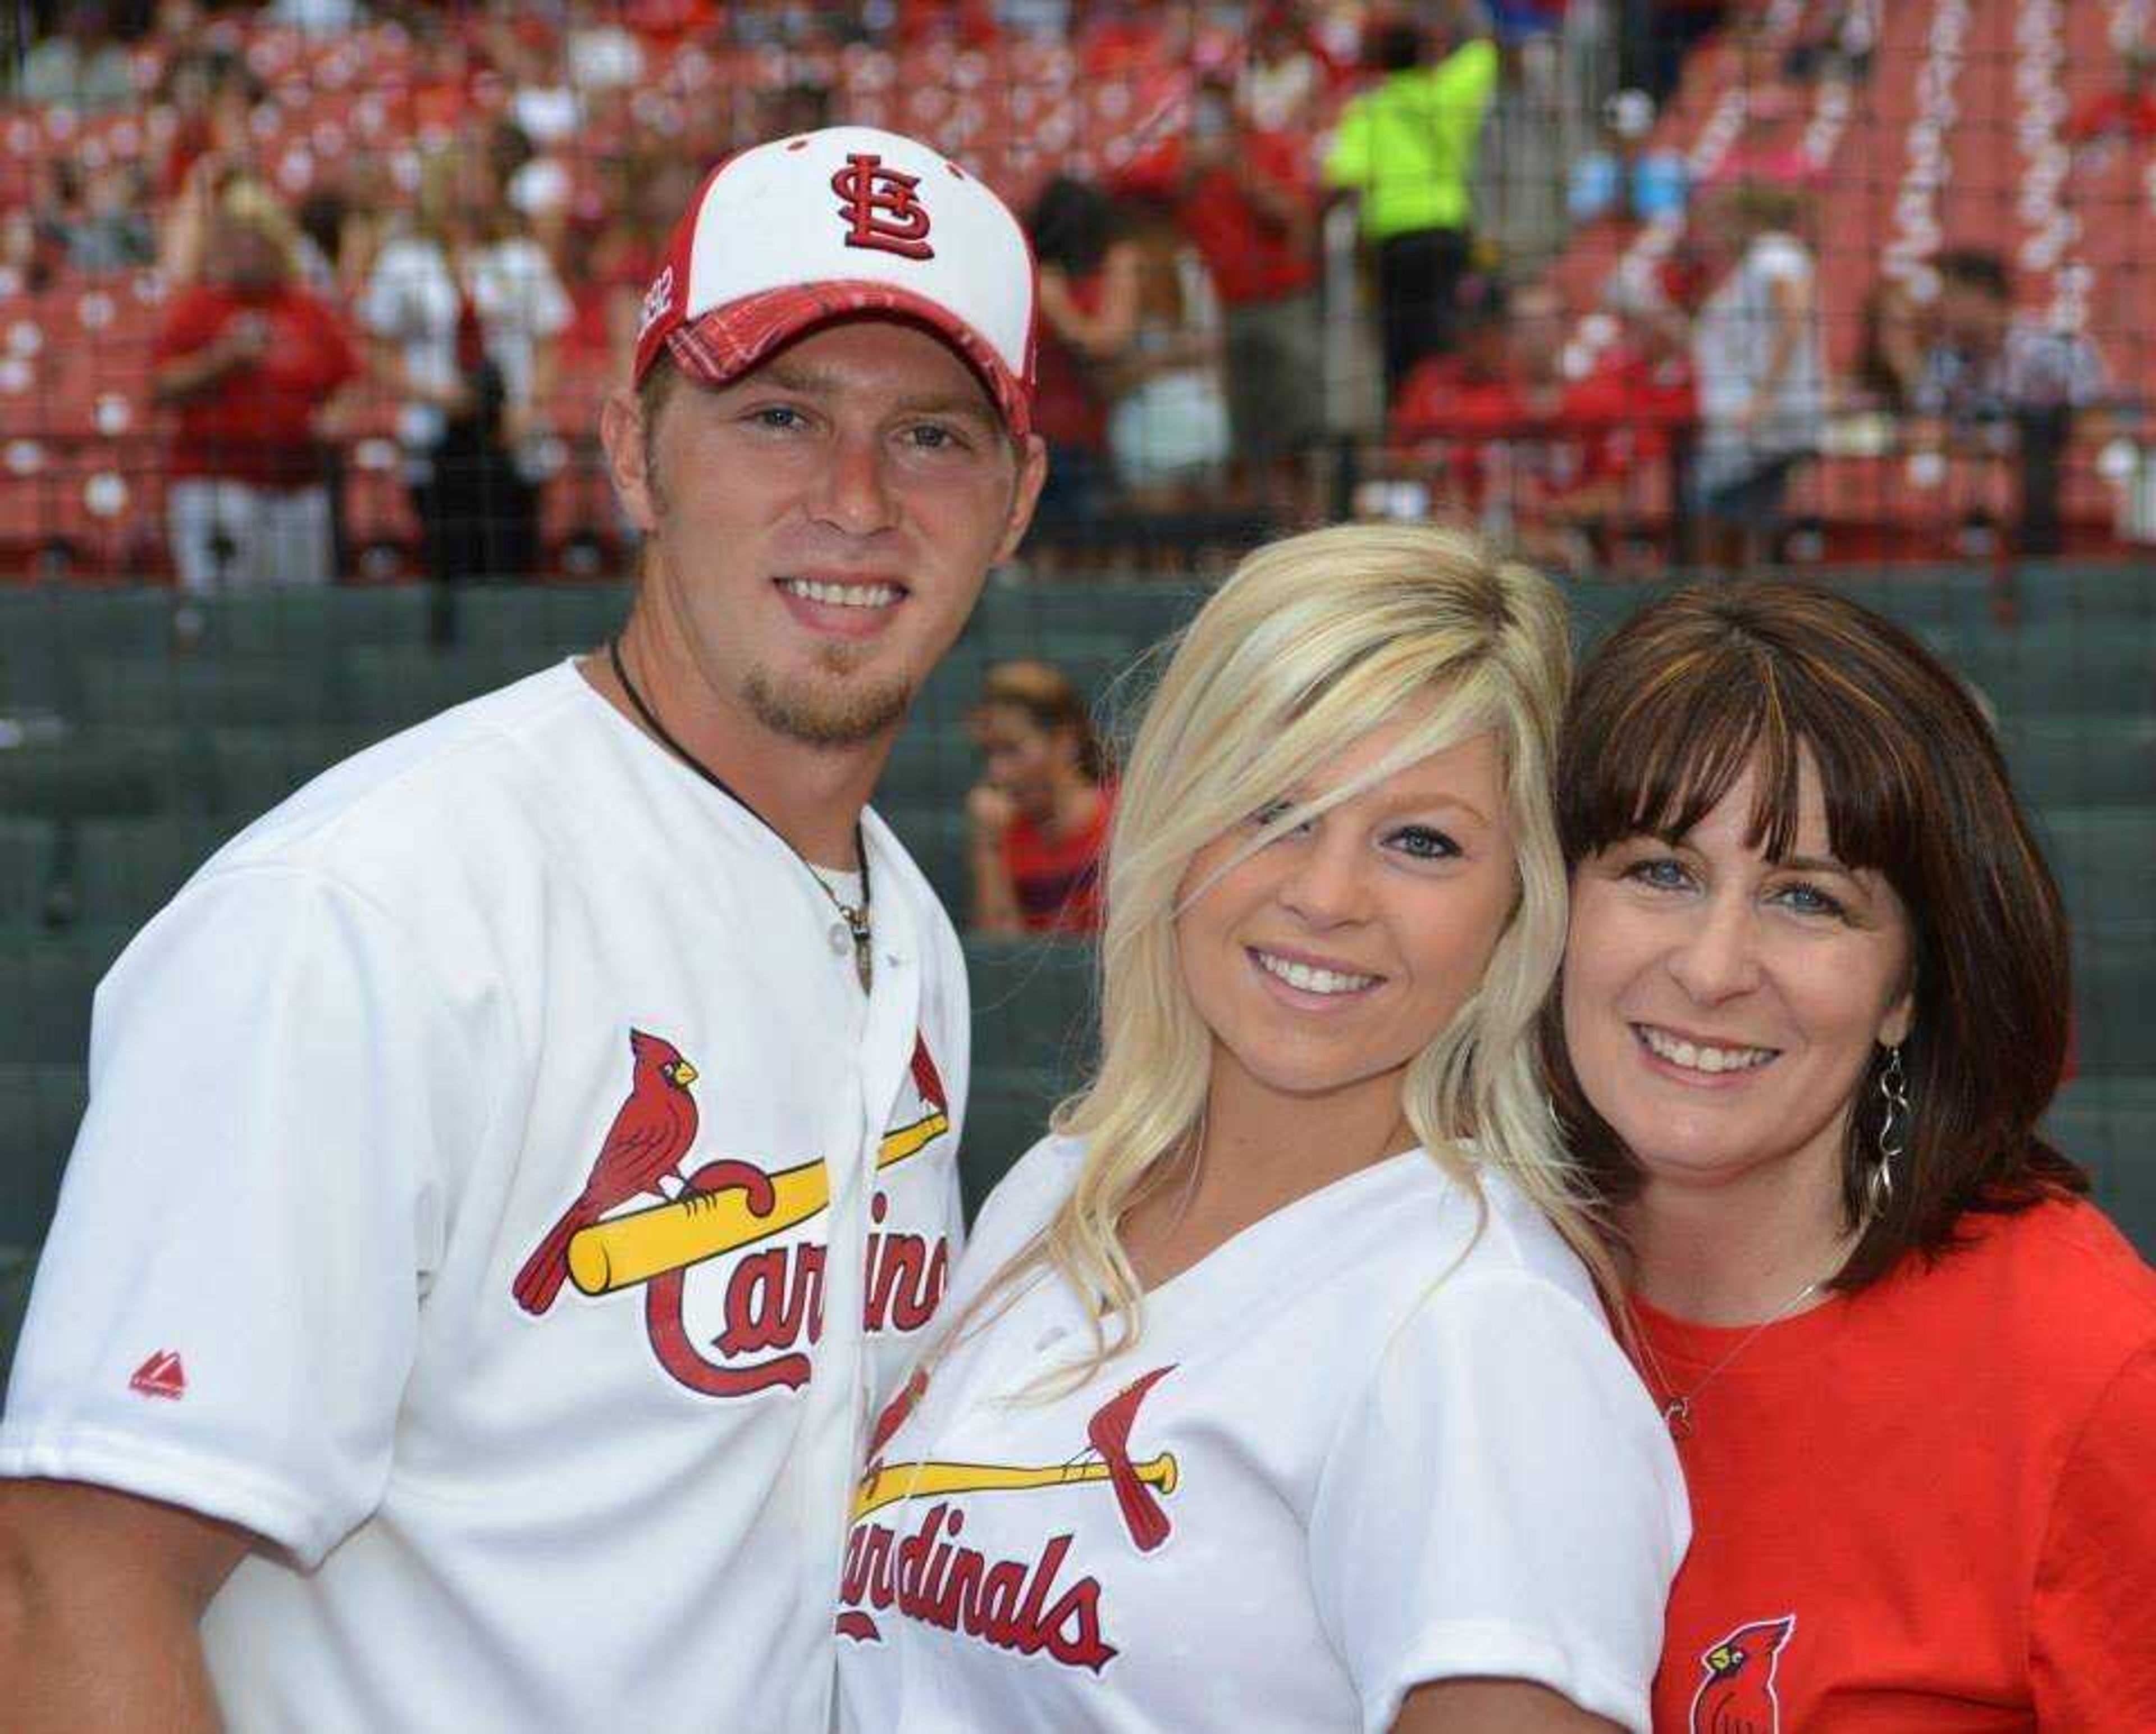 Meg Herndon's brother, sister and mother at the Cardinal game on July 23. Submitted photo.